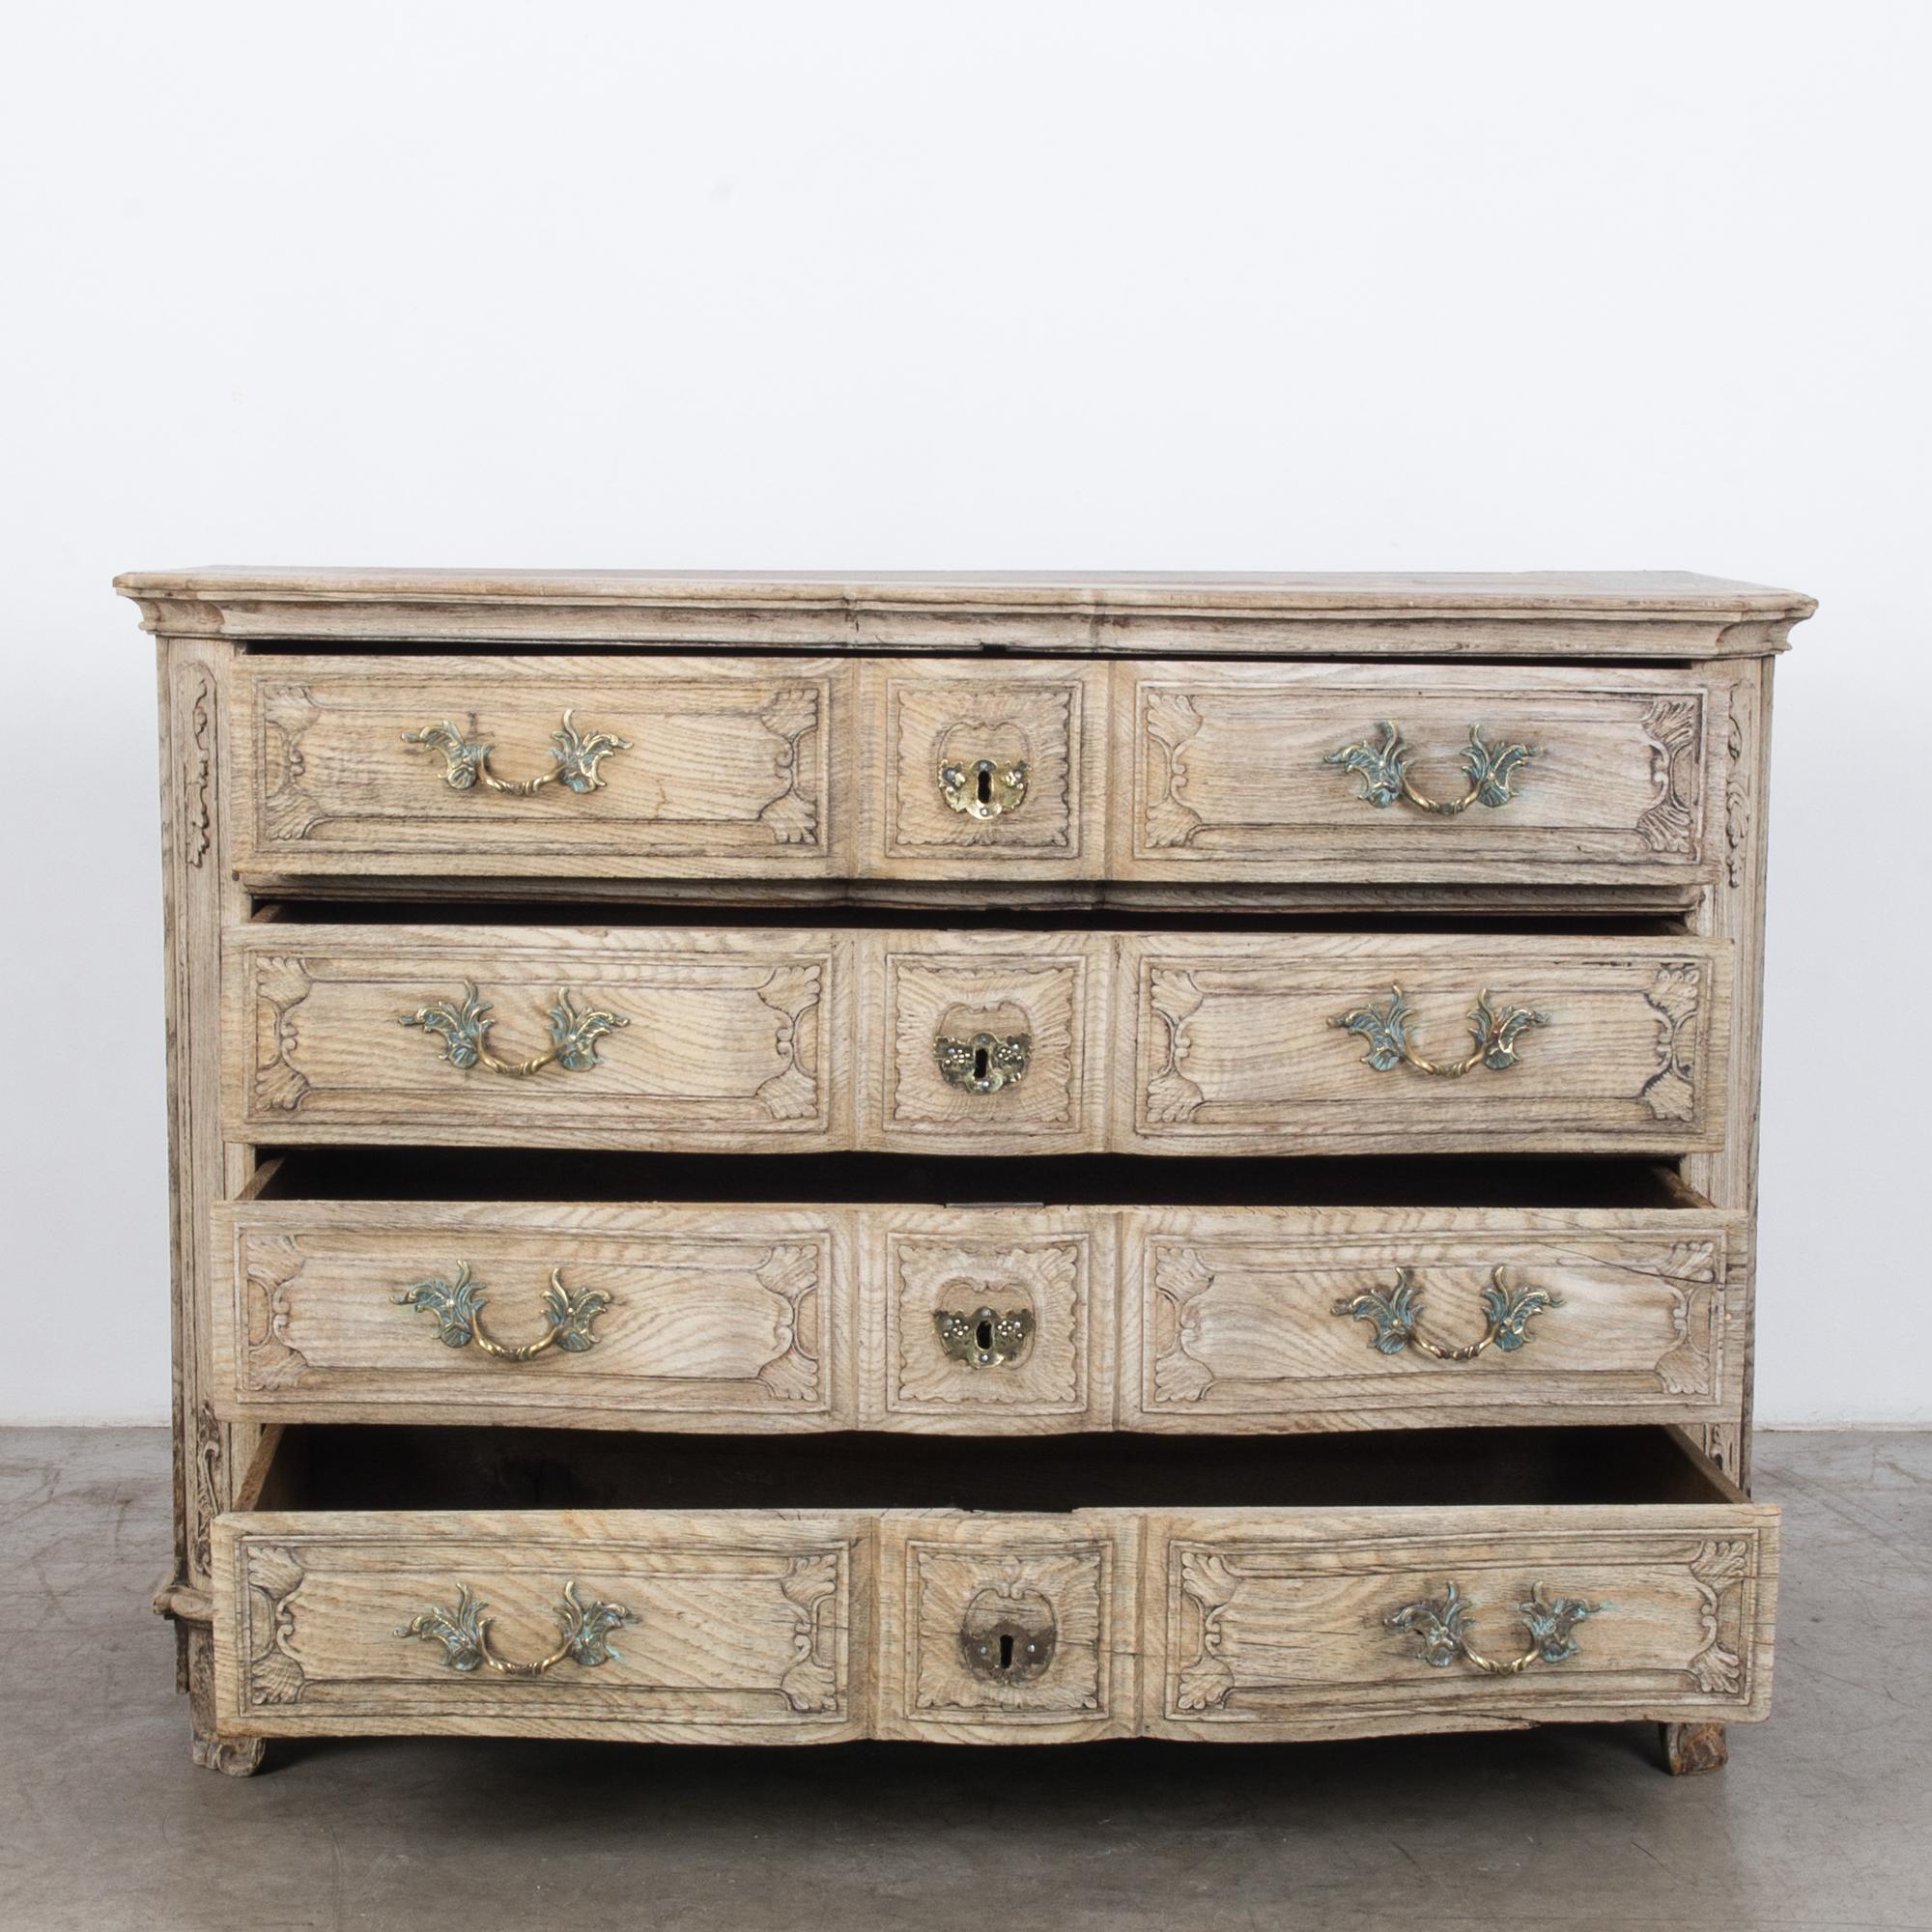 French Provincial Turn of the Century Belgian Drawer Chest